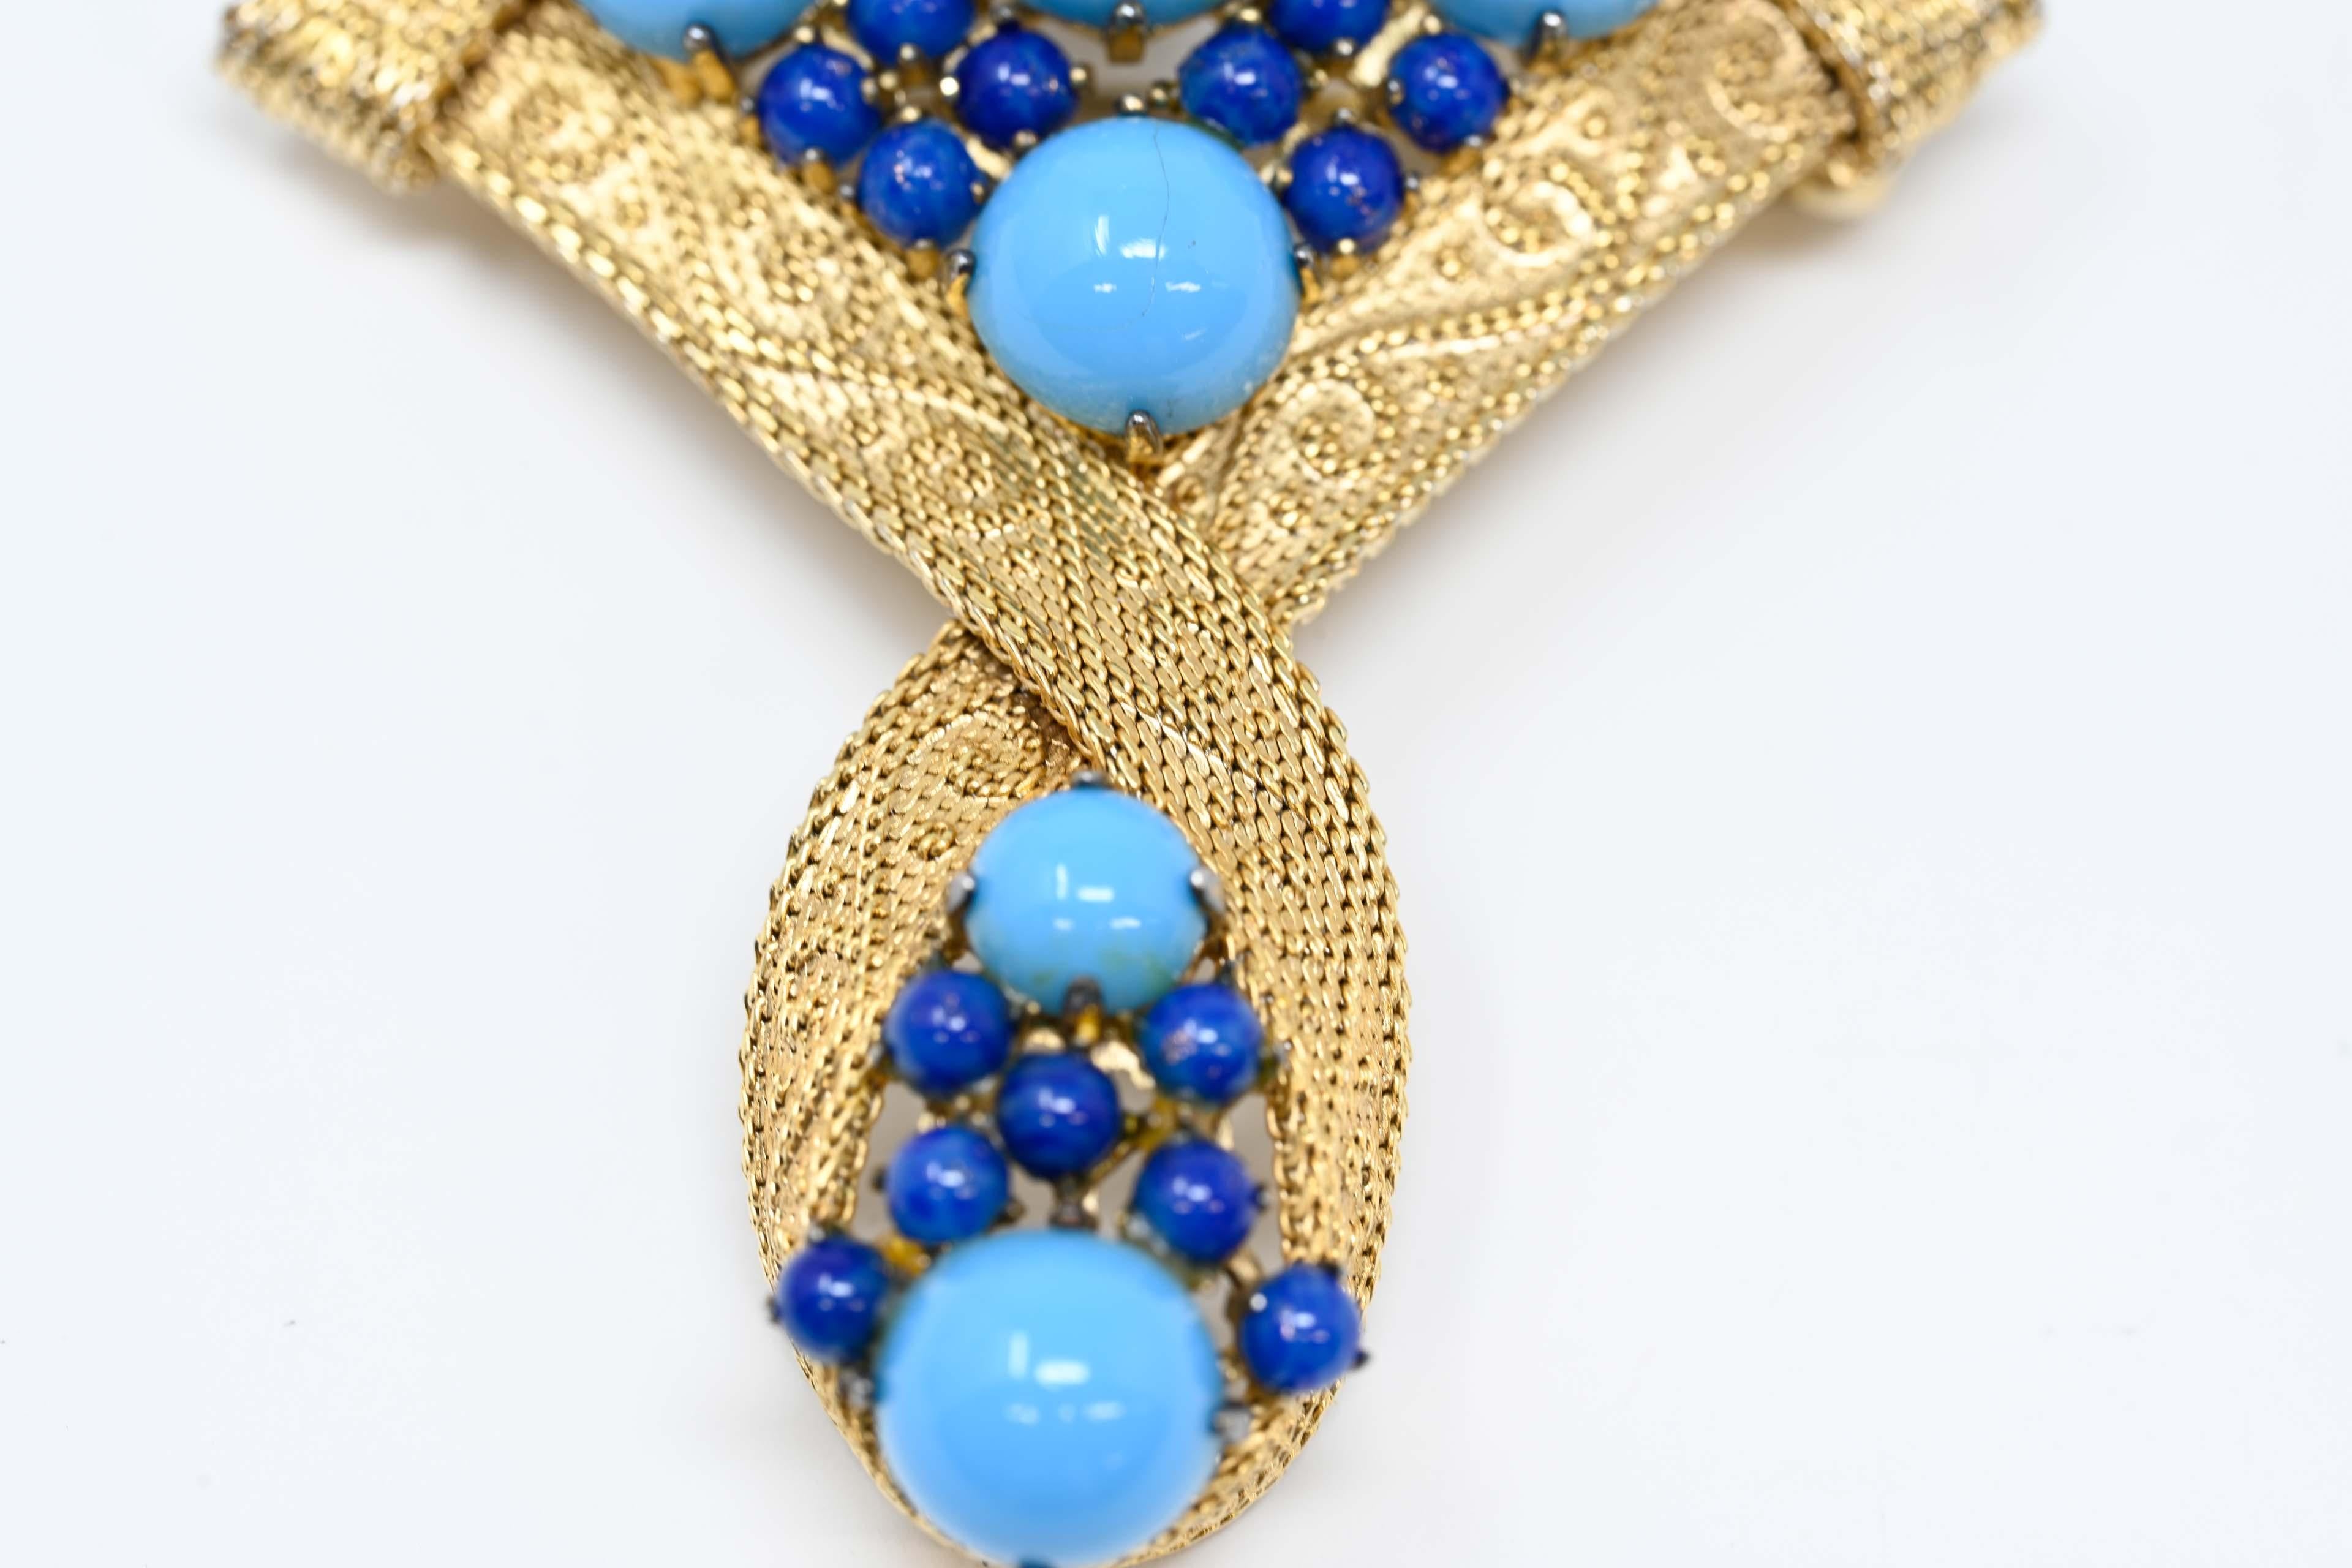 Christian Dior 1962 Blue Cabochon Brooch For Sale 3